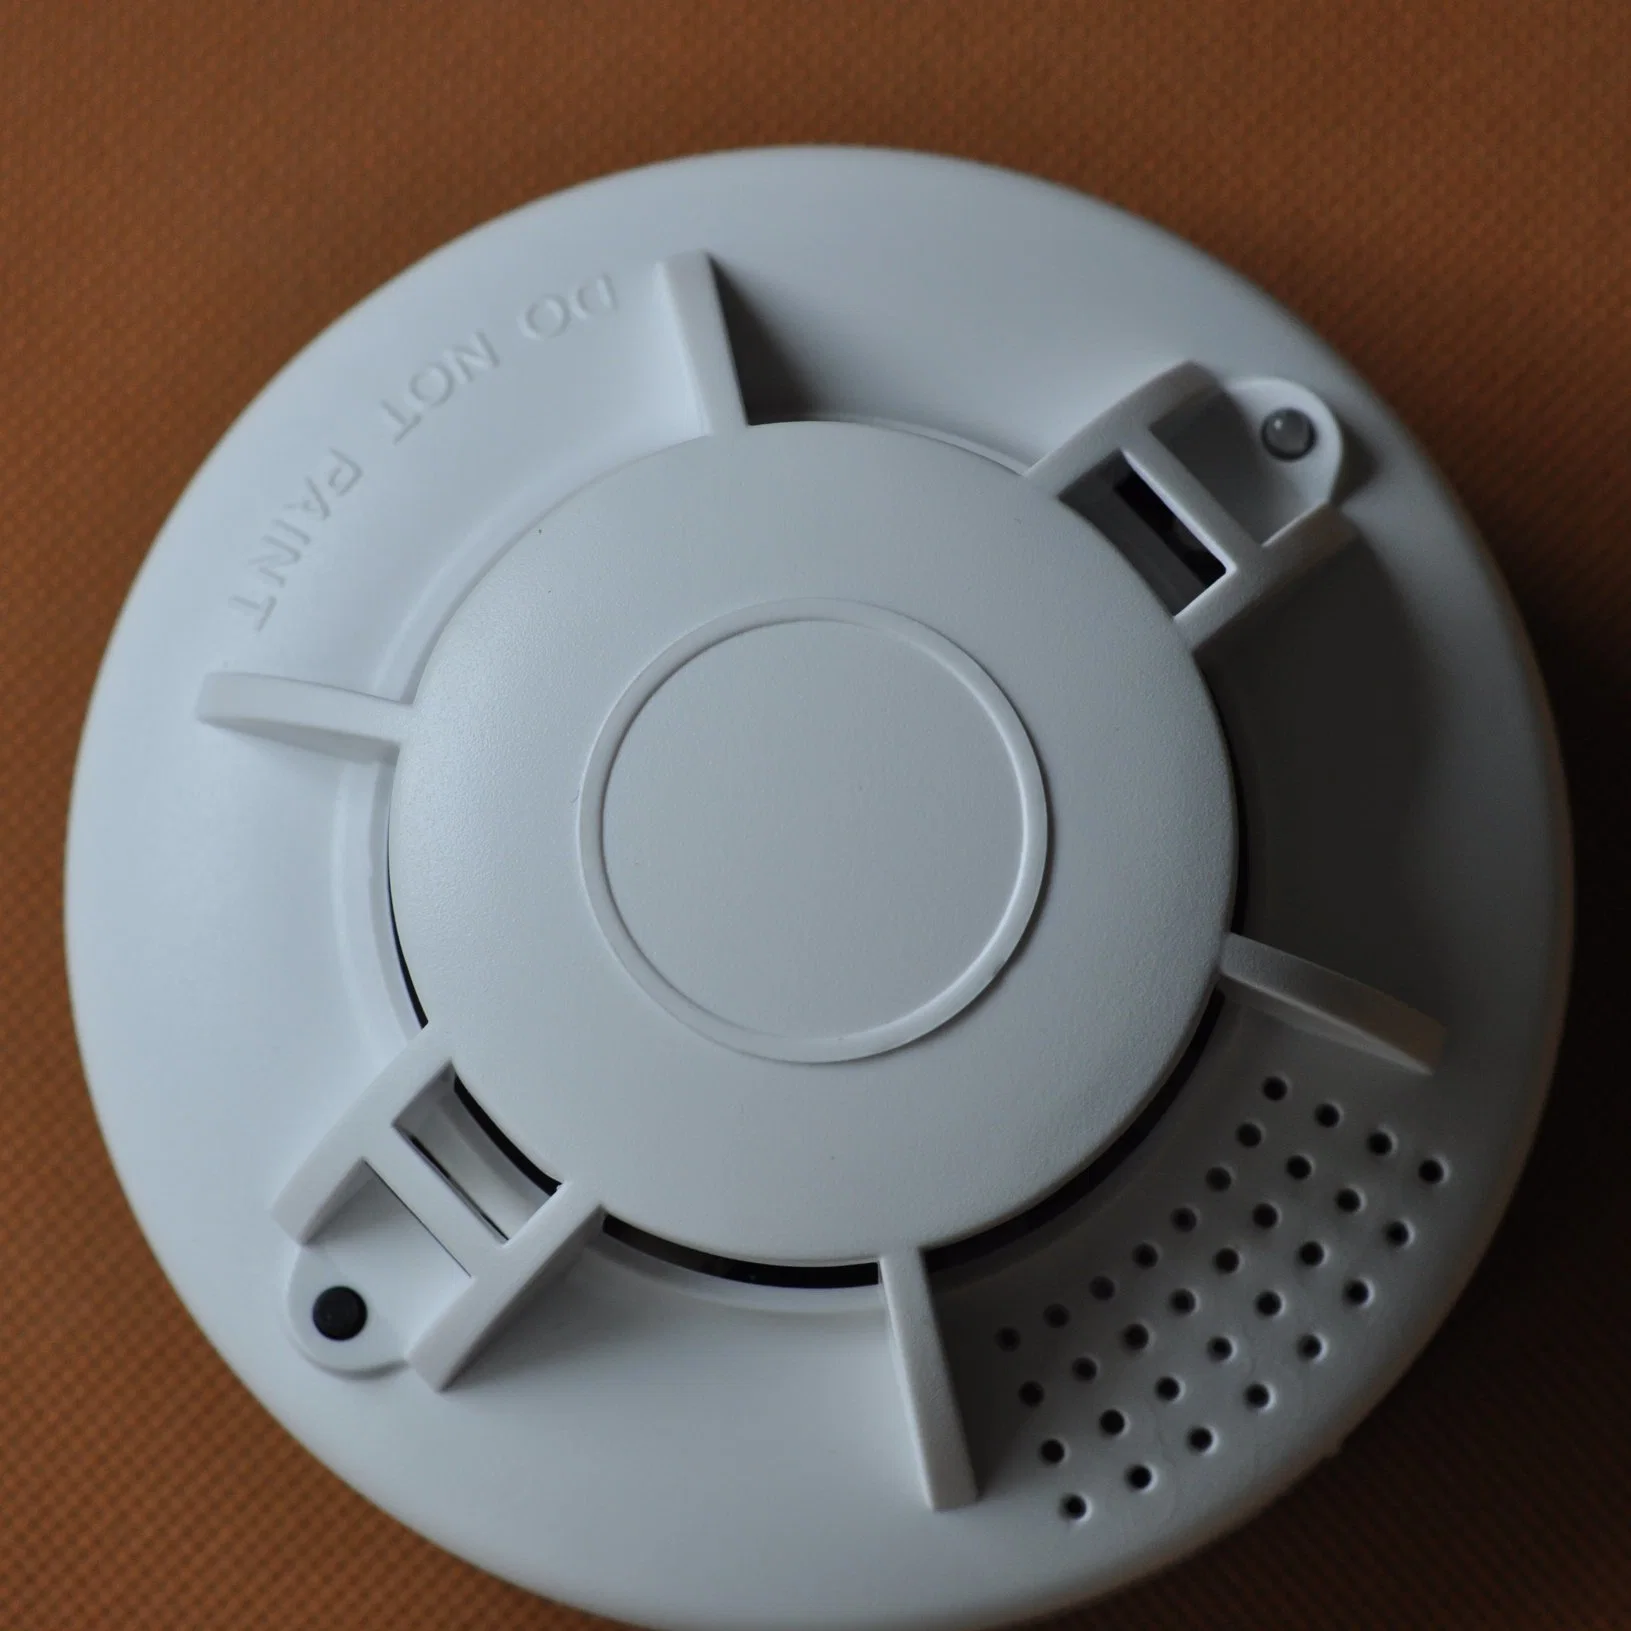 Home Security Fire Alarm Standalone Smoke Detector with 9V Battery Backup.